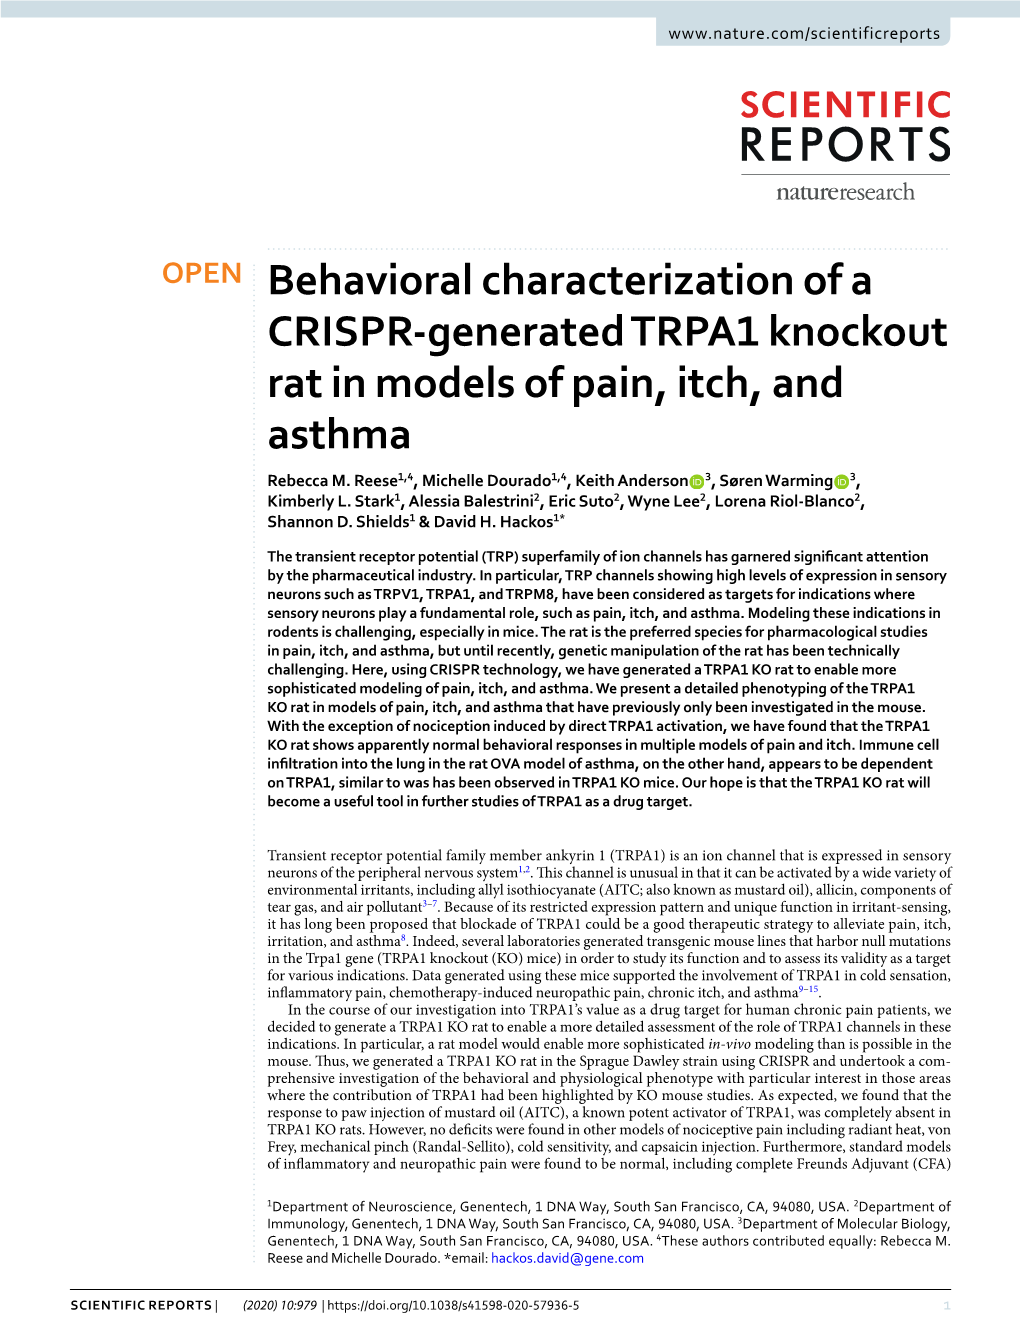 Behavioral Characterization of a CRISPR-Generated TRPA1 Knockout Rat in Models of Pain, Itch, and Asthma Rebecca M